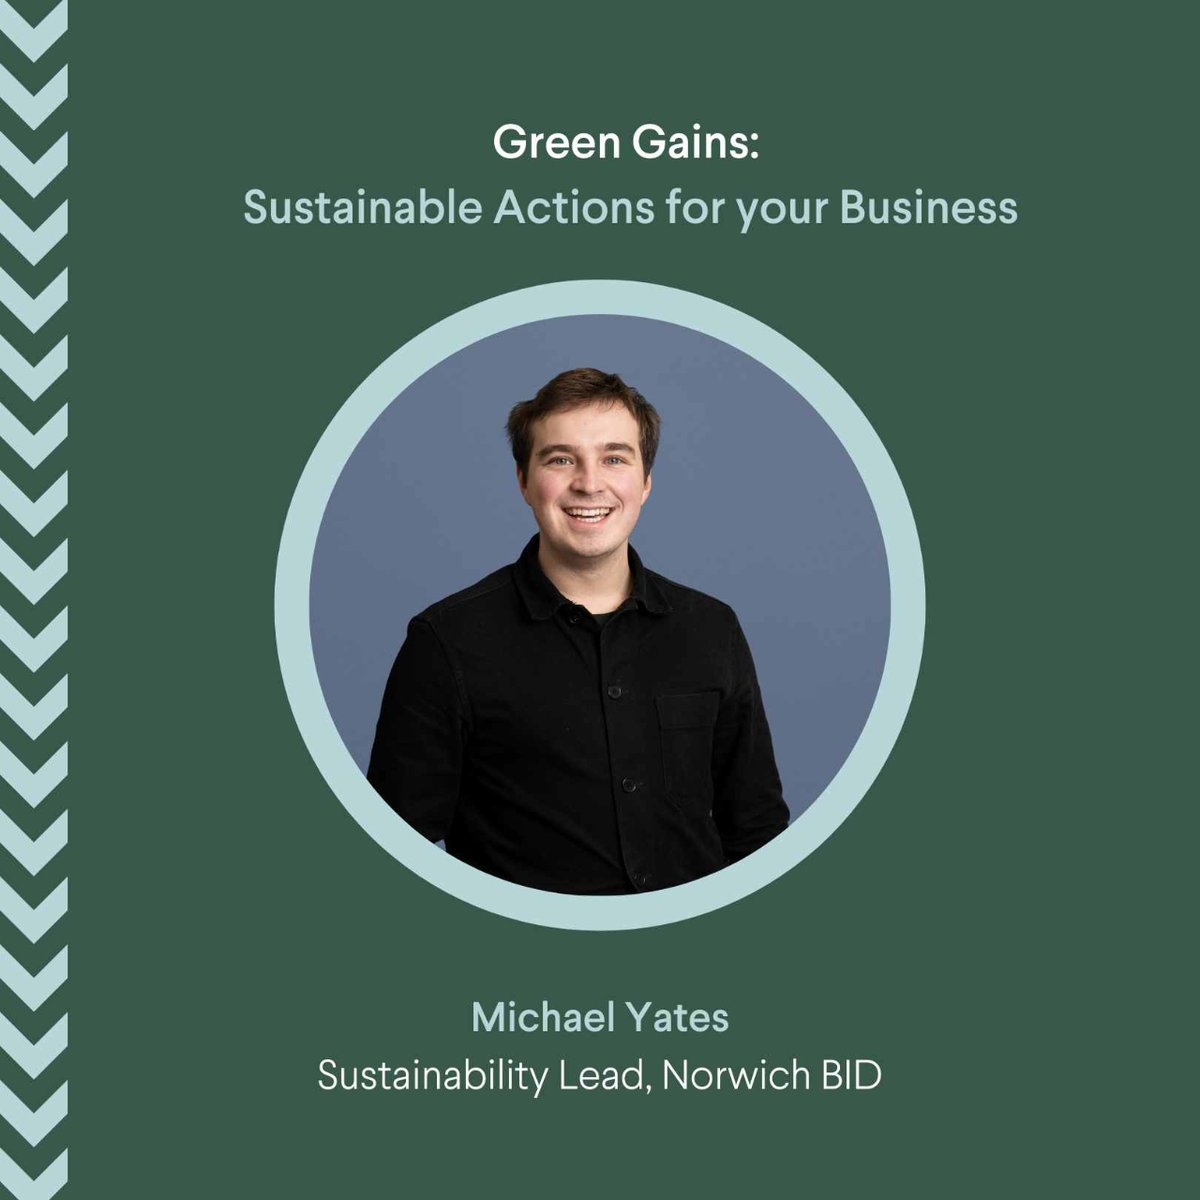 🗣SPEAKER ANNOUNCEMENT 🗣 We are delighted to have our sustainability expert Michael Yates leading our upcoming event at this year's Norwich Business Festival! Book tickets: tinyurl.com/yem5cfej #NorwichBID #NorwichBusiness #Event #SustainableDevelopment